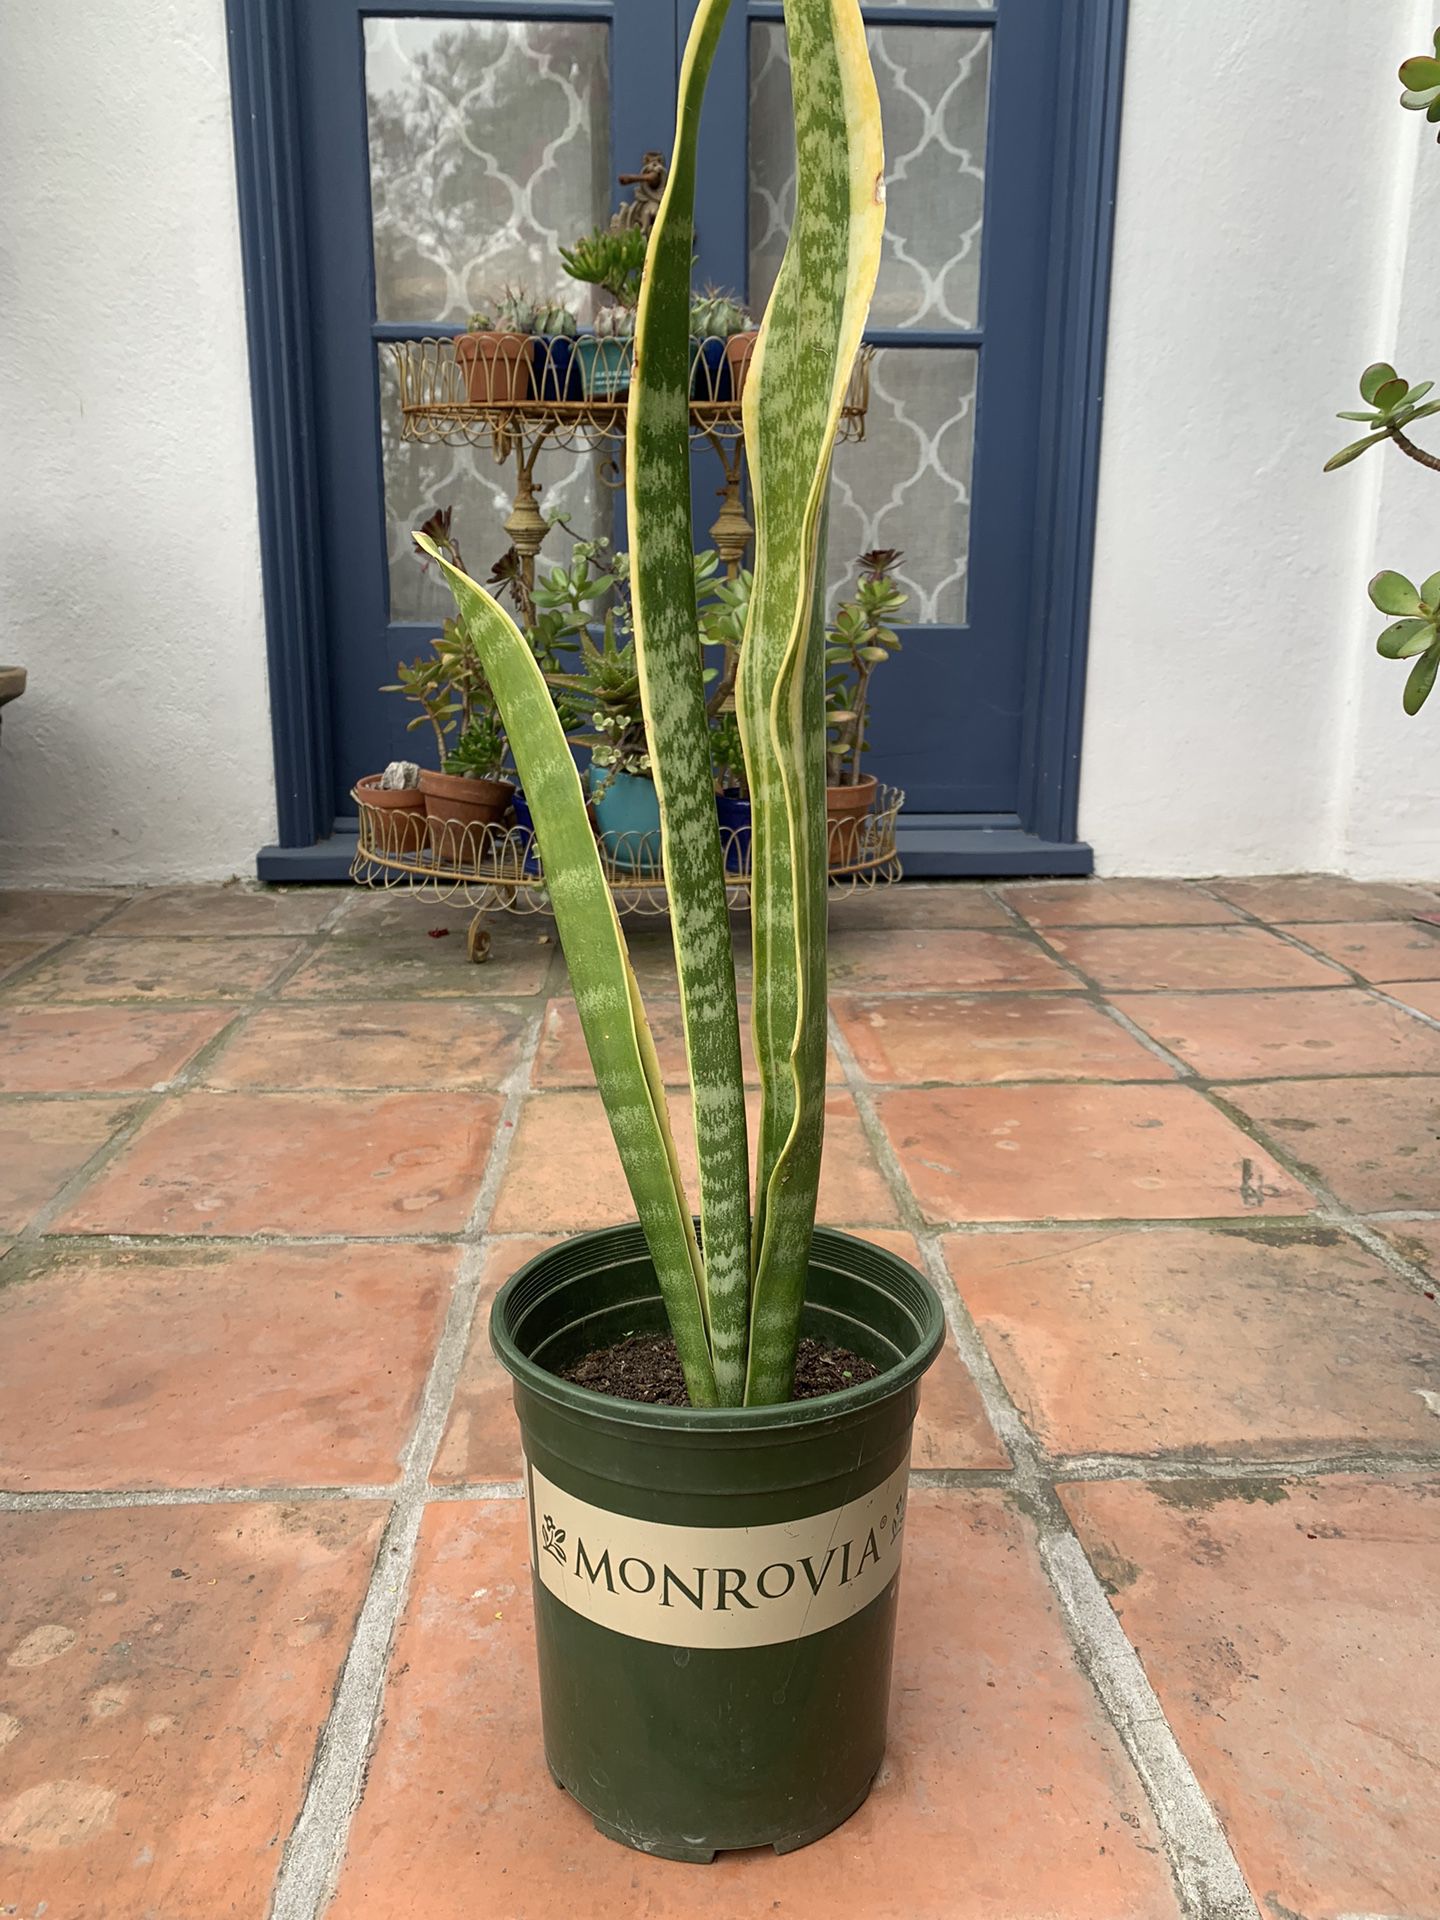 26” Tall Snake Plant in 1 Gallon Container Pot